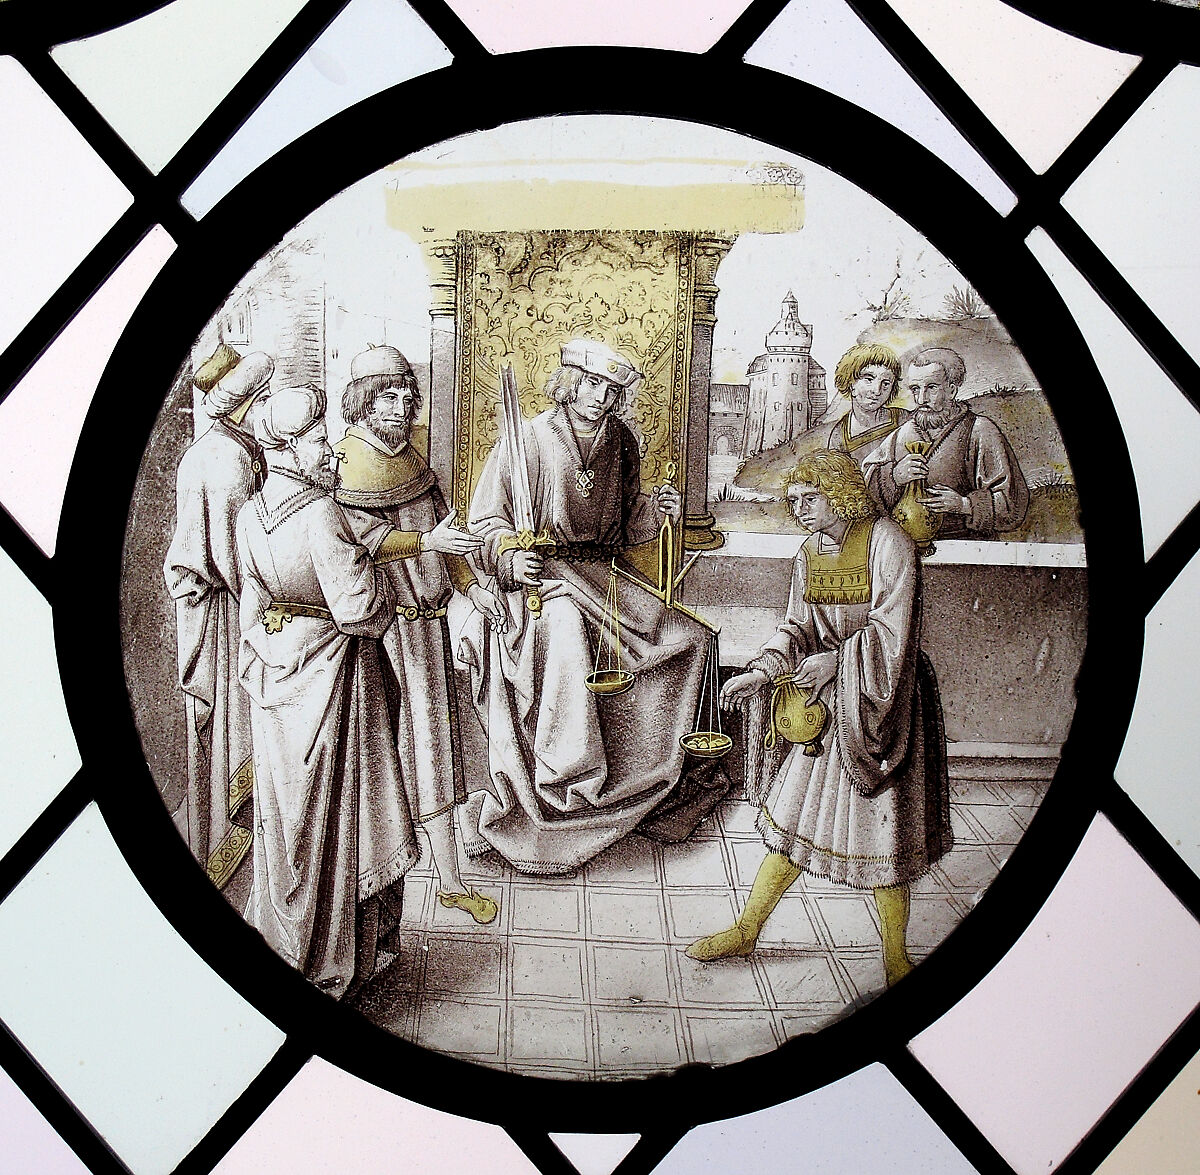 Roundel with Judgment or Allegorical Scene, Colorless glass, vitreous paint and silver stain, South Netherlandish 